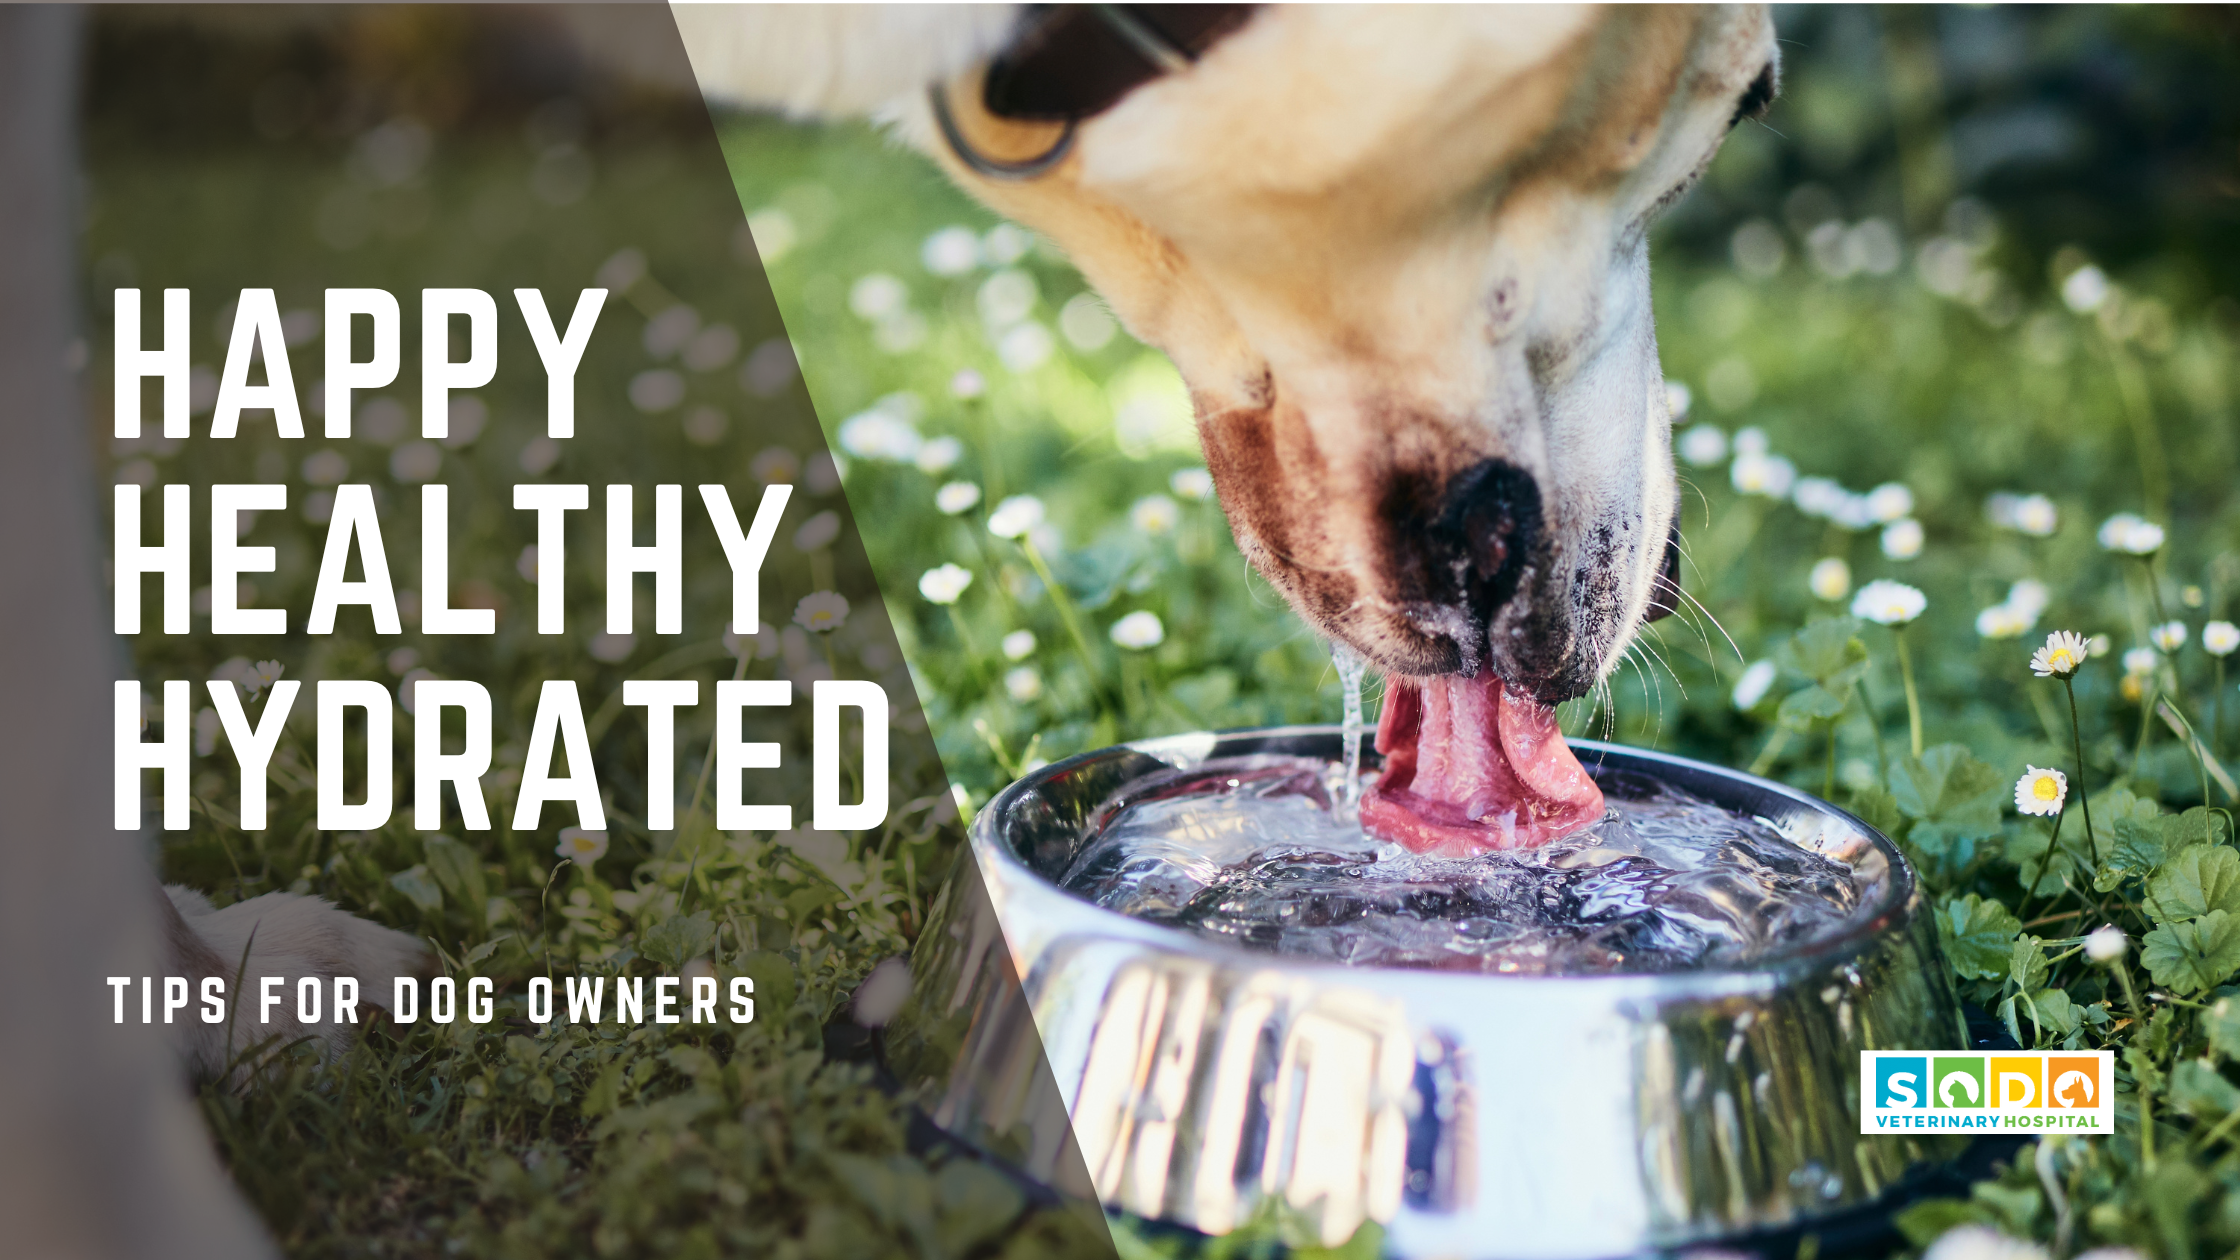 Hydration Tips for Dogs